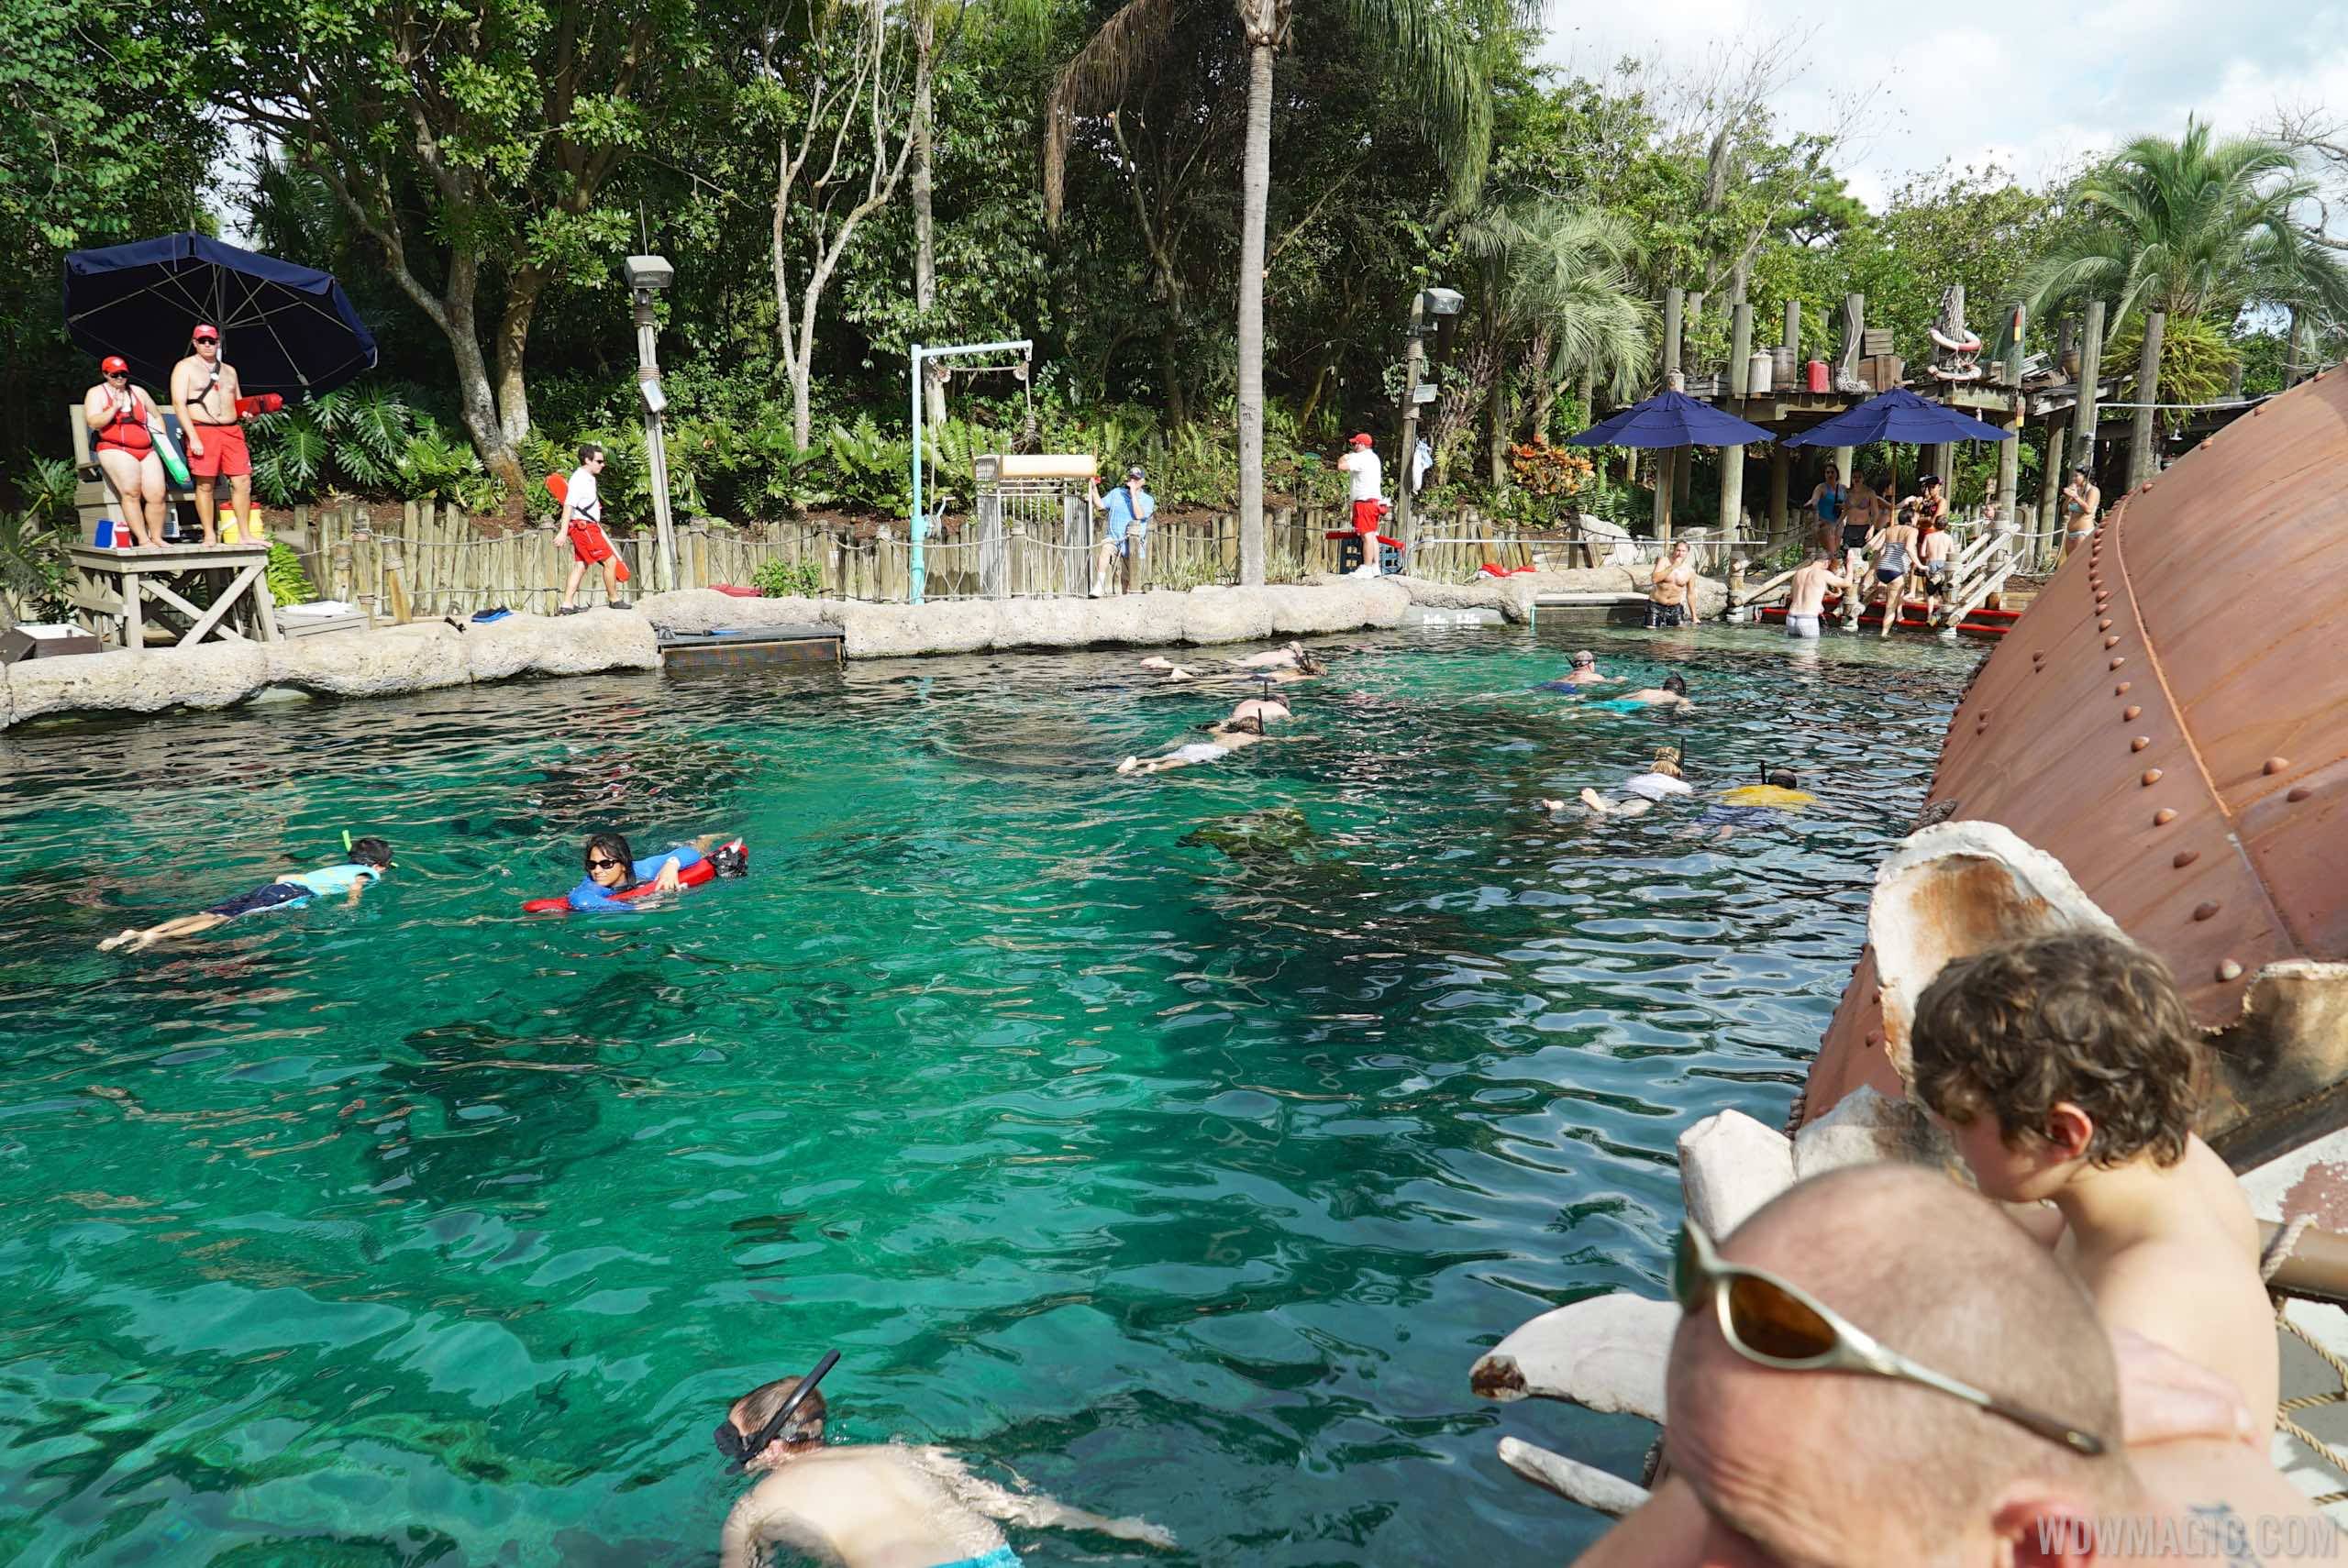 Typhoon Lagoon reopens after annual refurbishment